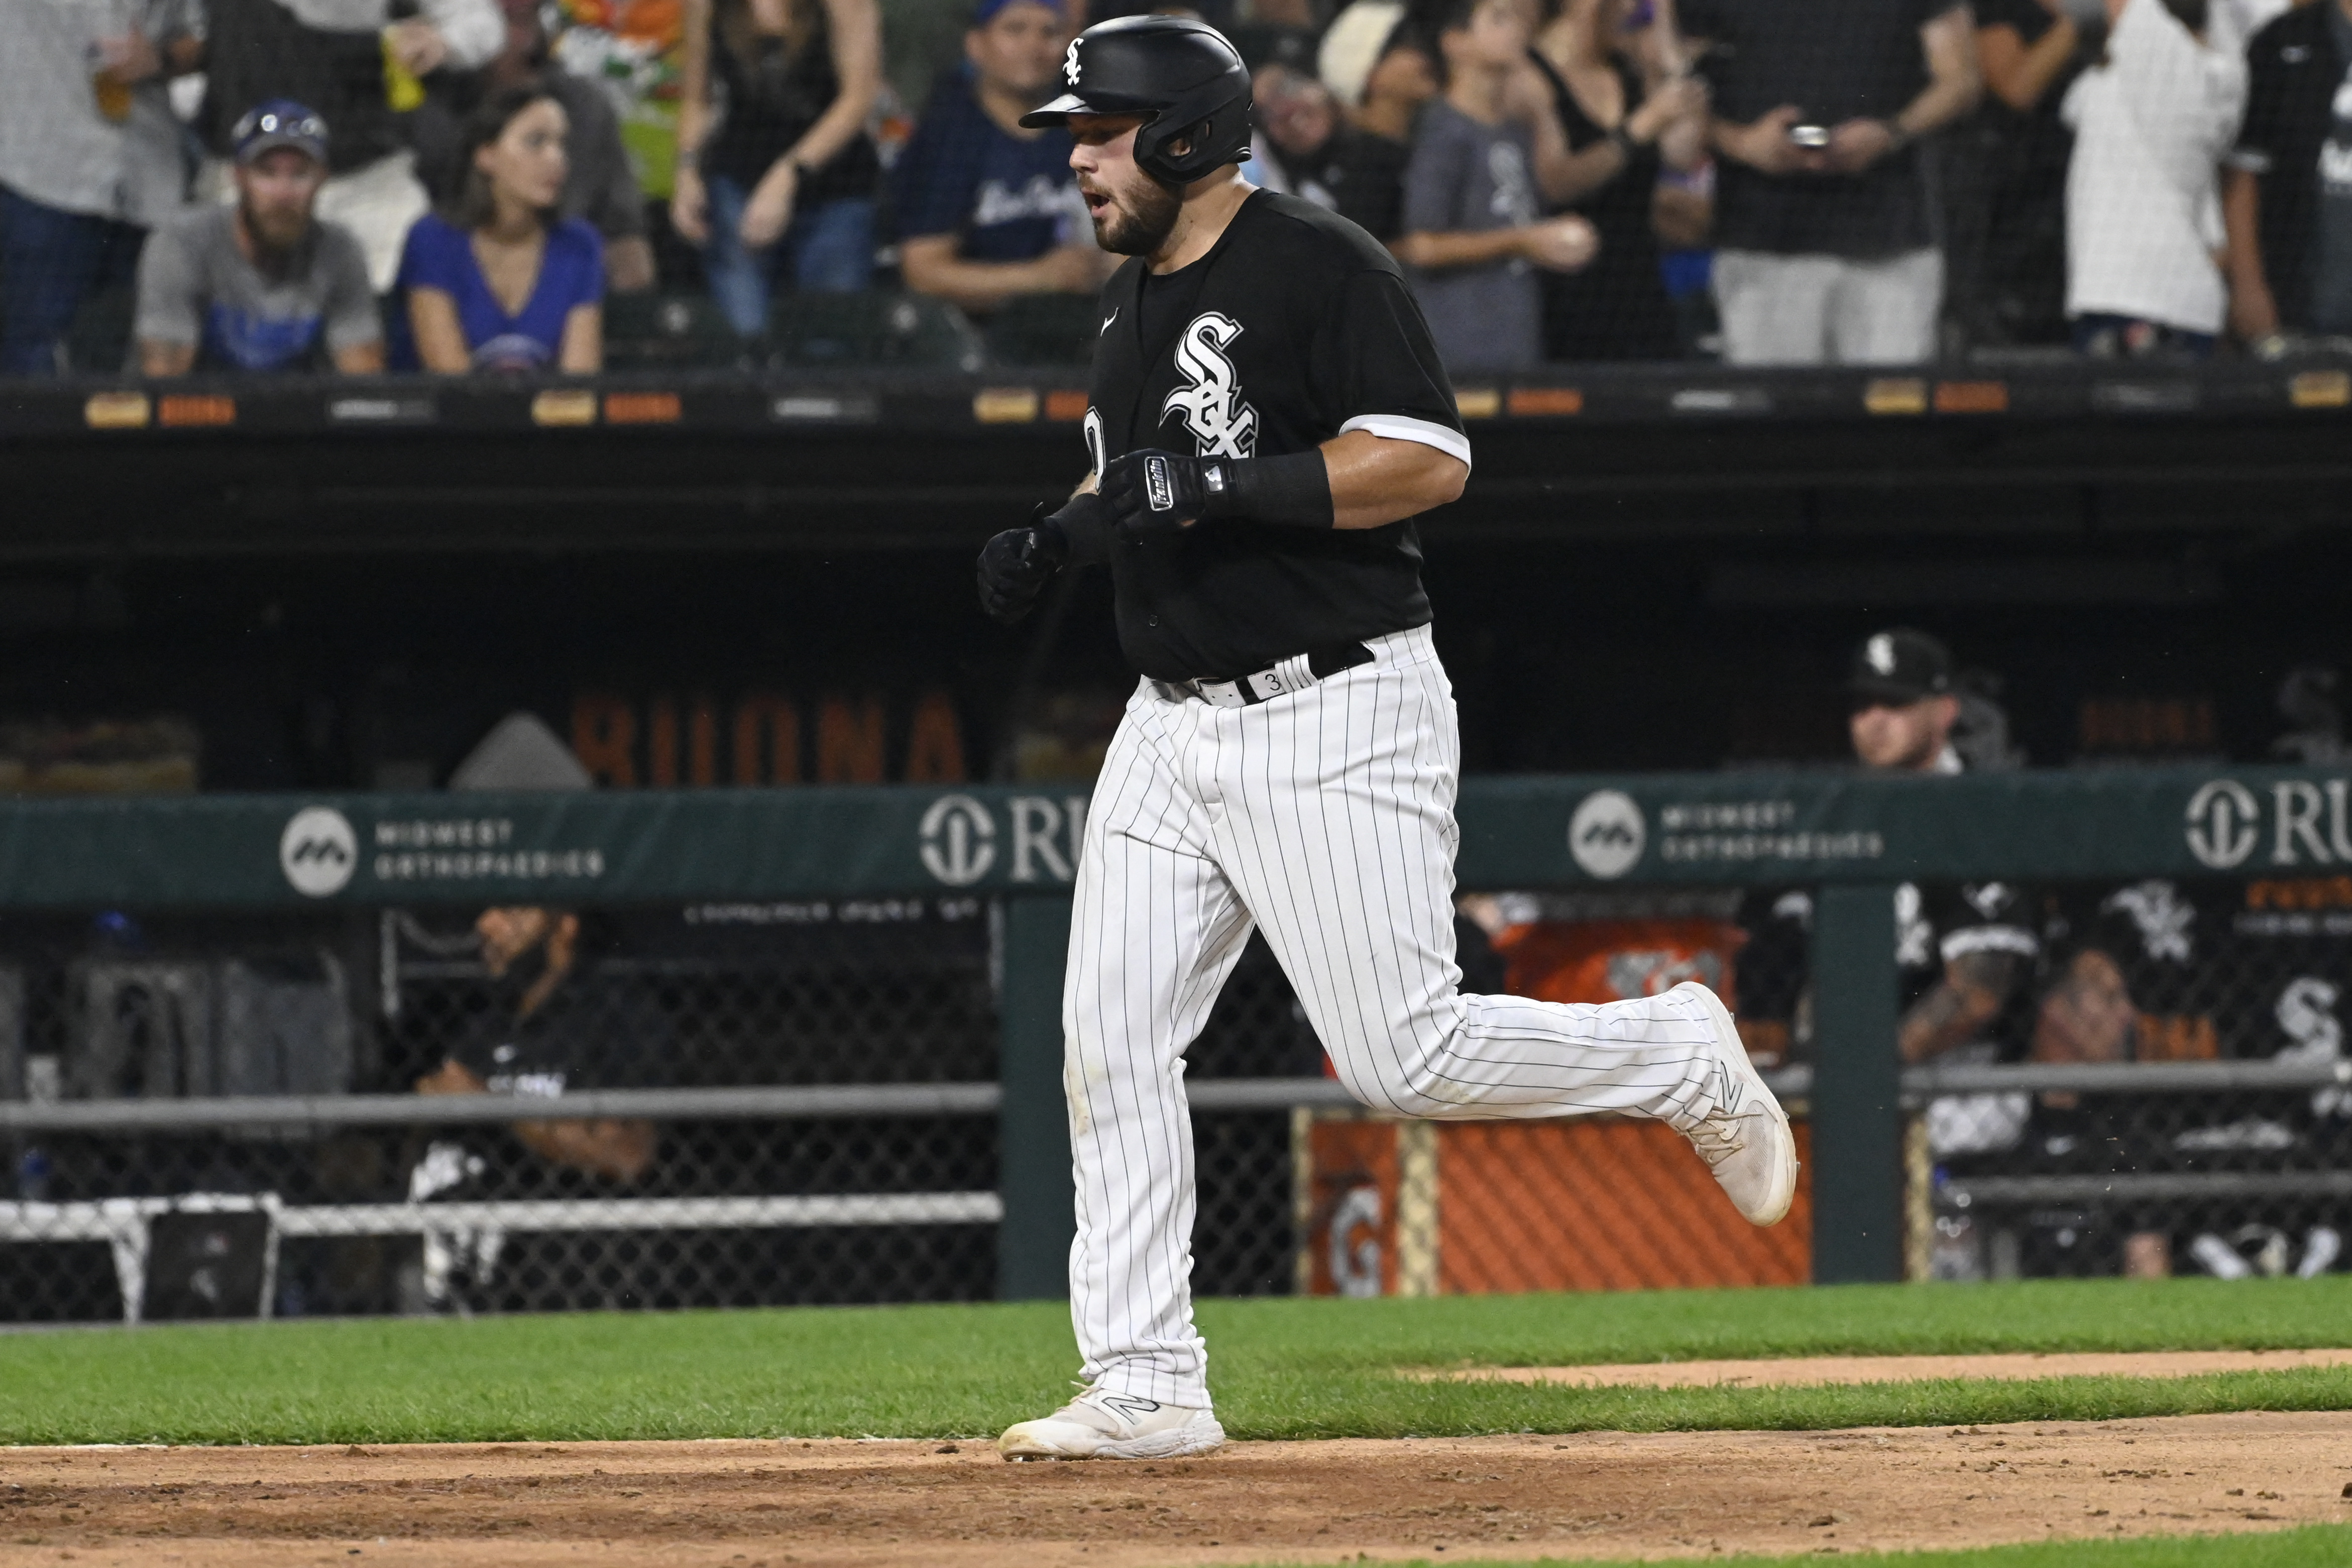 White Sox own the Cubs, Congratulations on beating a minor league team -  Chicago White Sox fans share mixed reactions after victory over Chicago Cubs,  expect better from their team